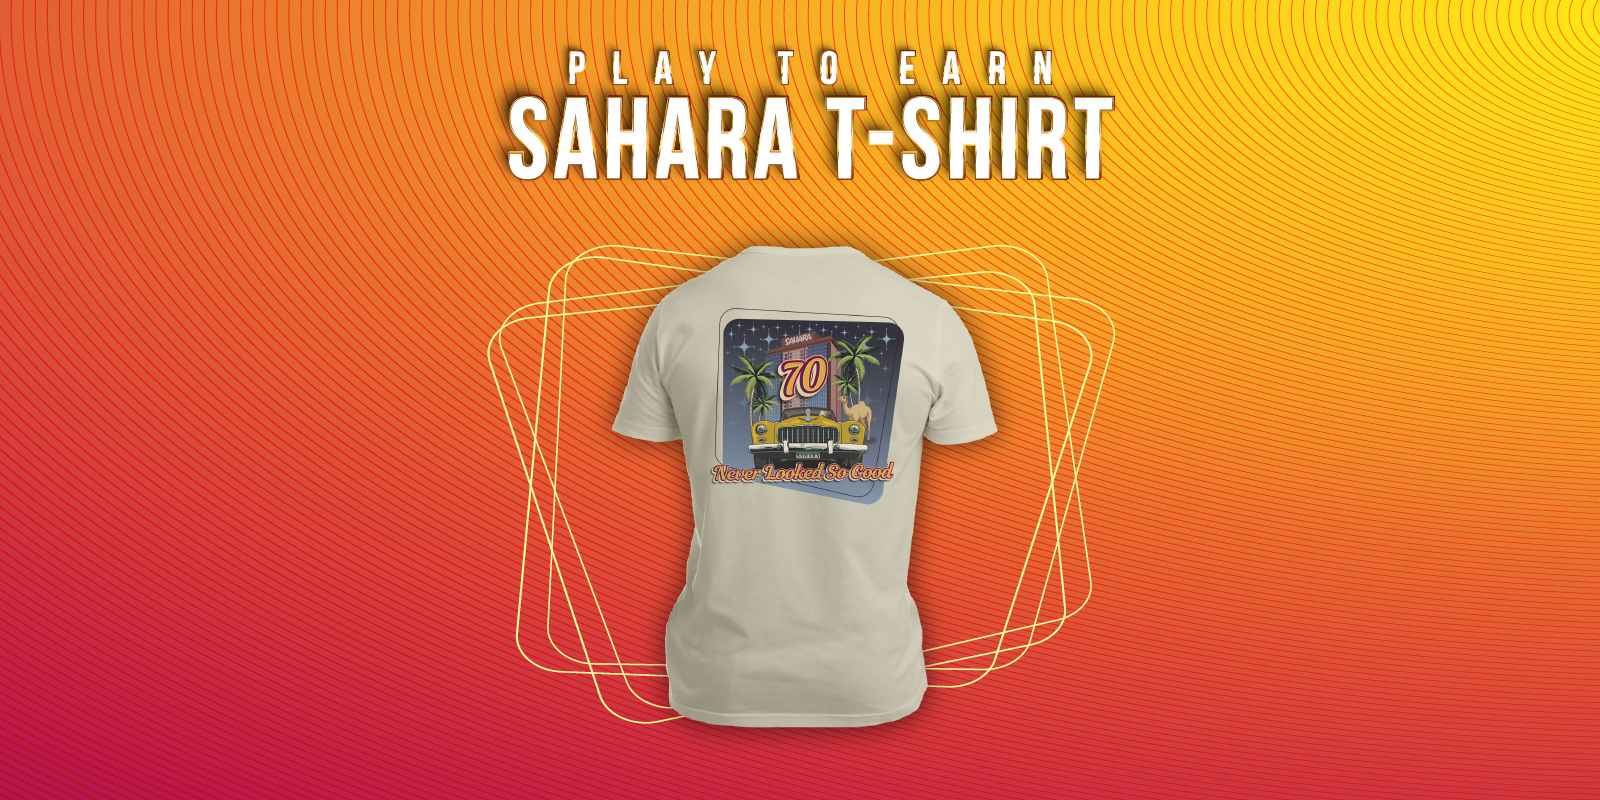 SAHARA branded 70th anniversary t-shirt with a red and orange gradient background